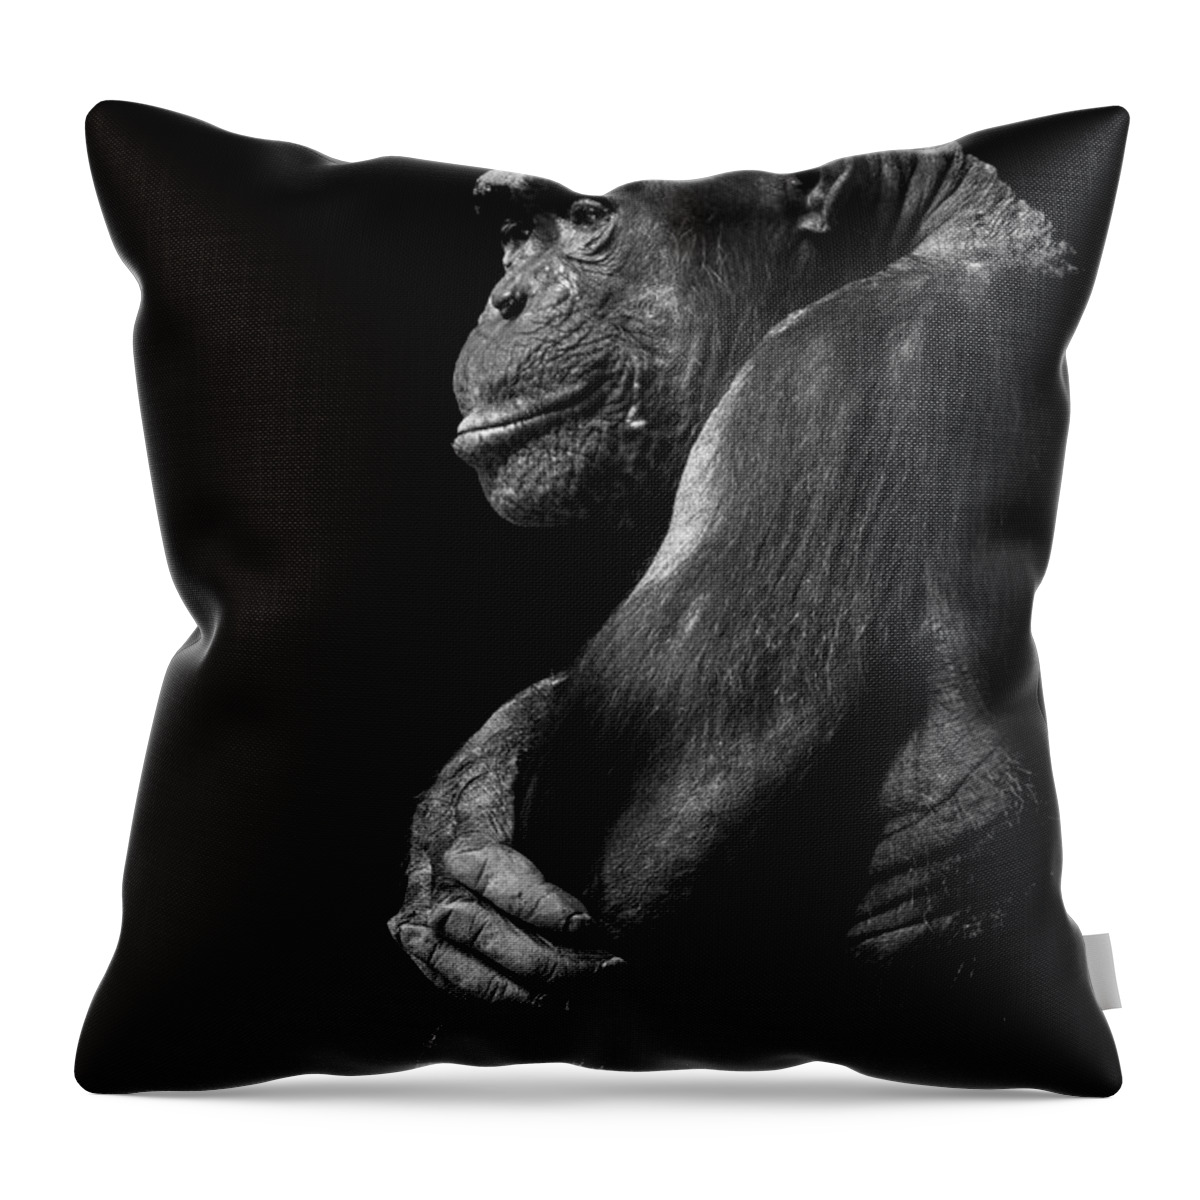 Chimp Throw Pillow featuring the photograph Thinking by Bill Cubitt